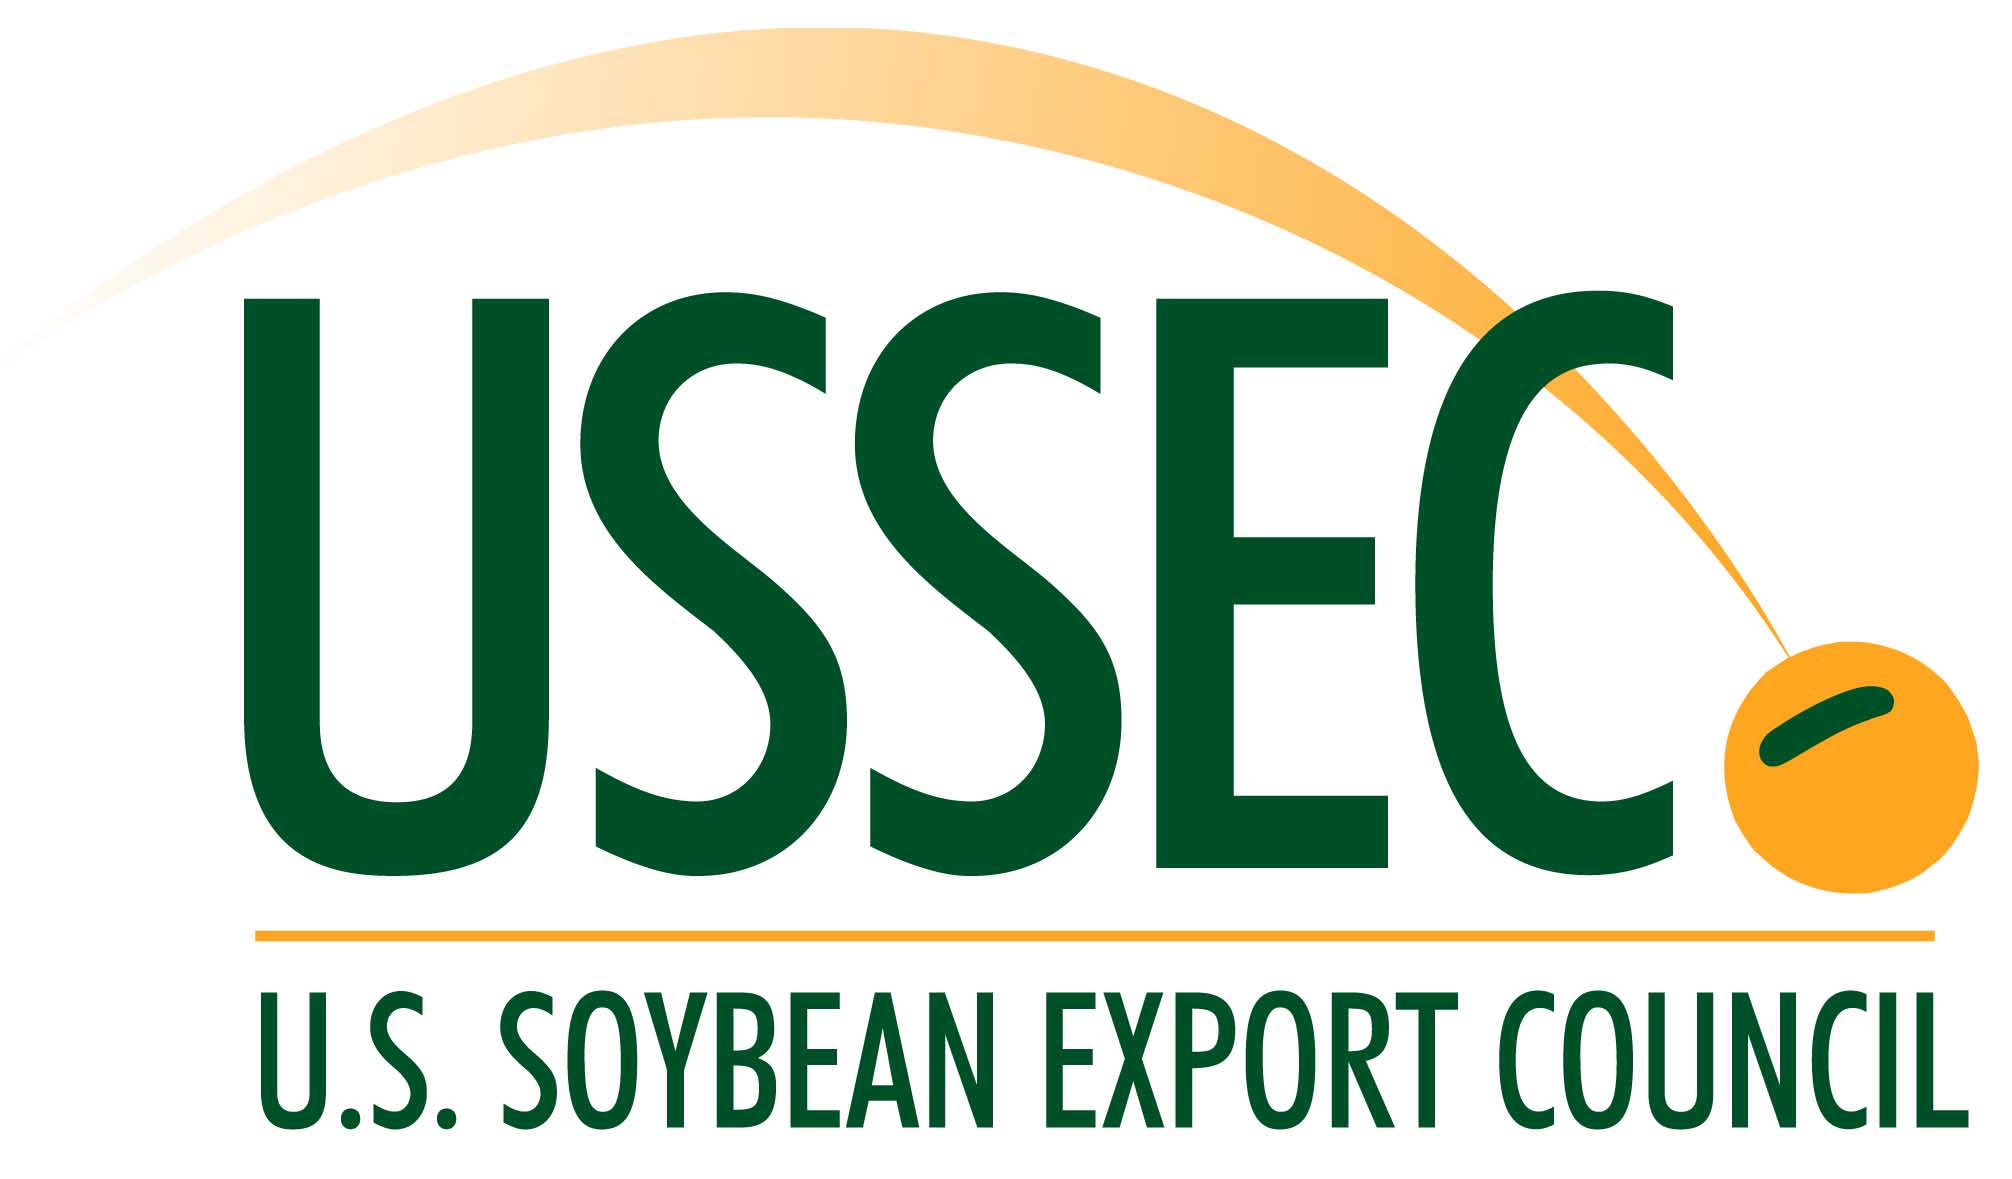 U.S. Soybean Export Council Hosts SOY CONNEXT, the World's Largest Soy Summit 